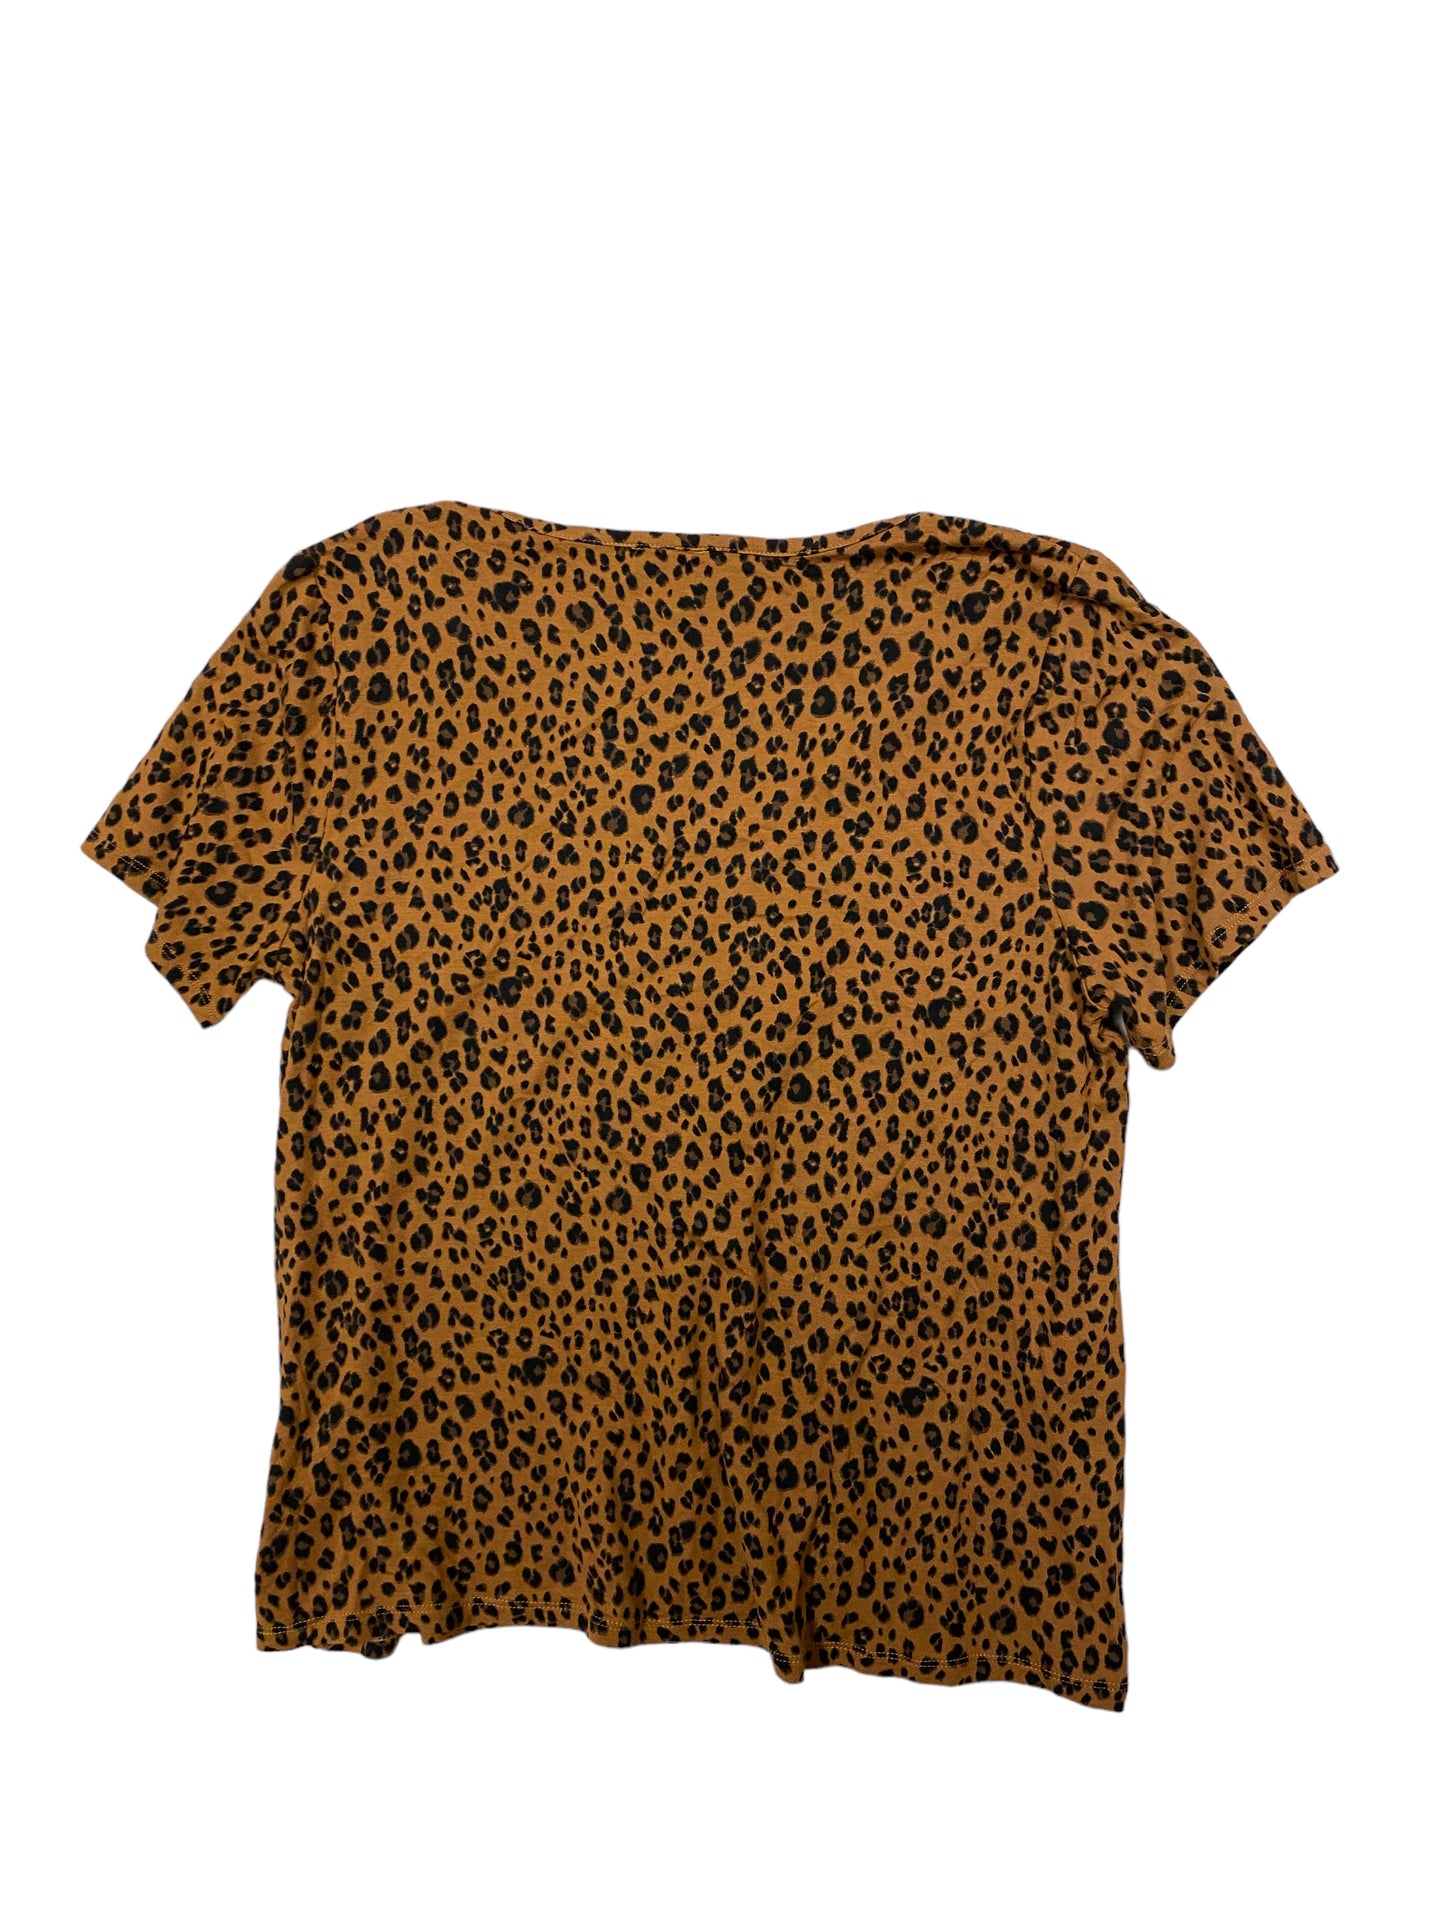 Animal Print Top Short Sleeve Old Navy, Size M